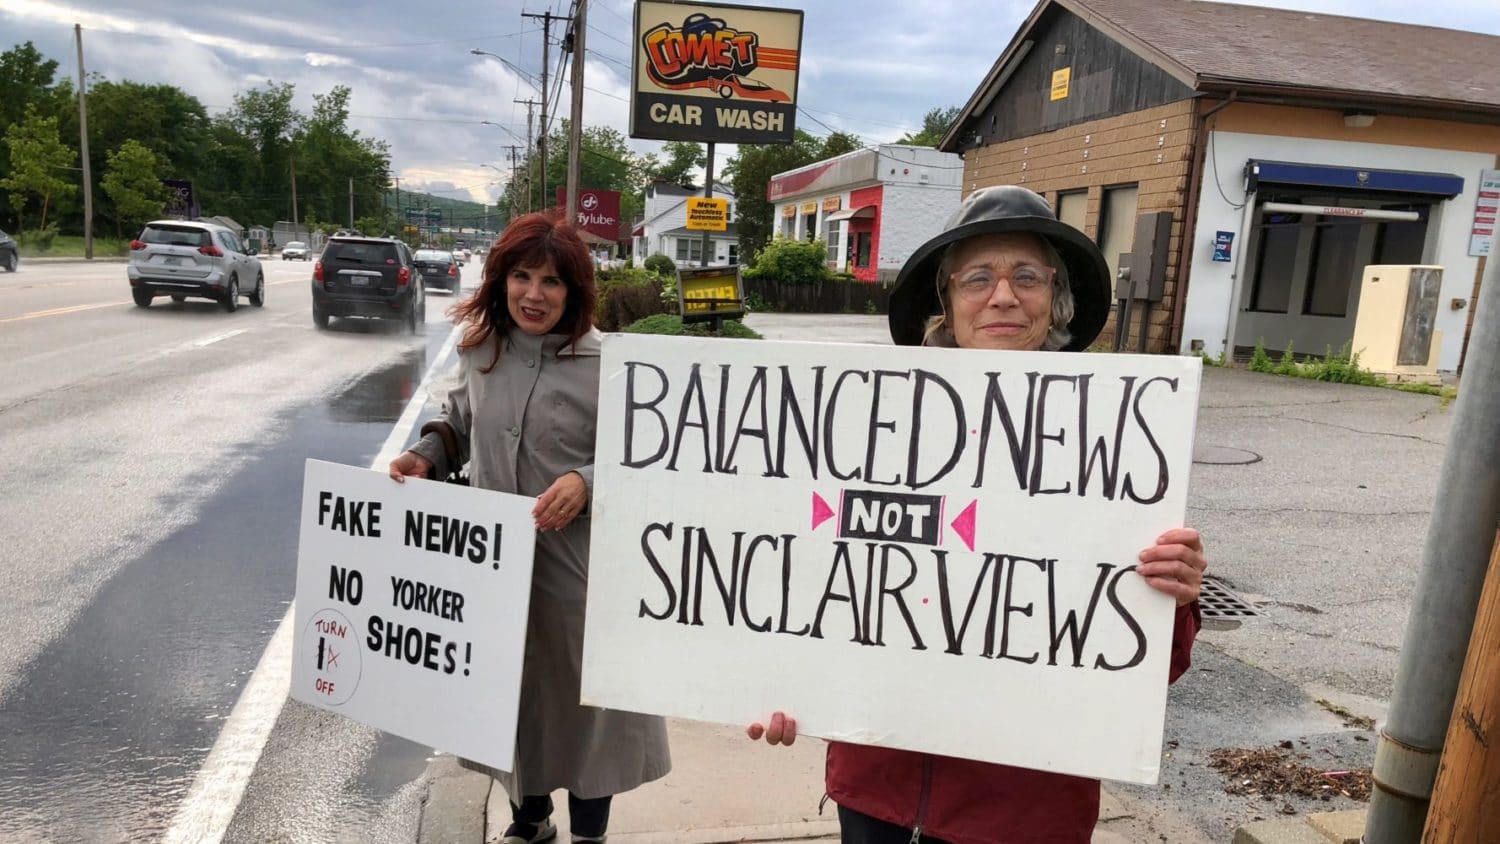 Turn off 10 targets Yorker Shoes over Sinclair advertising